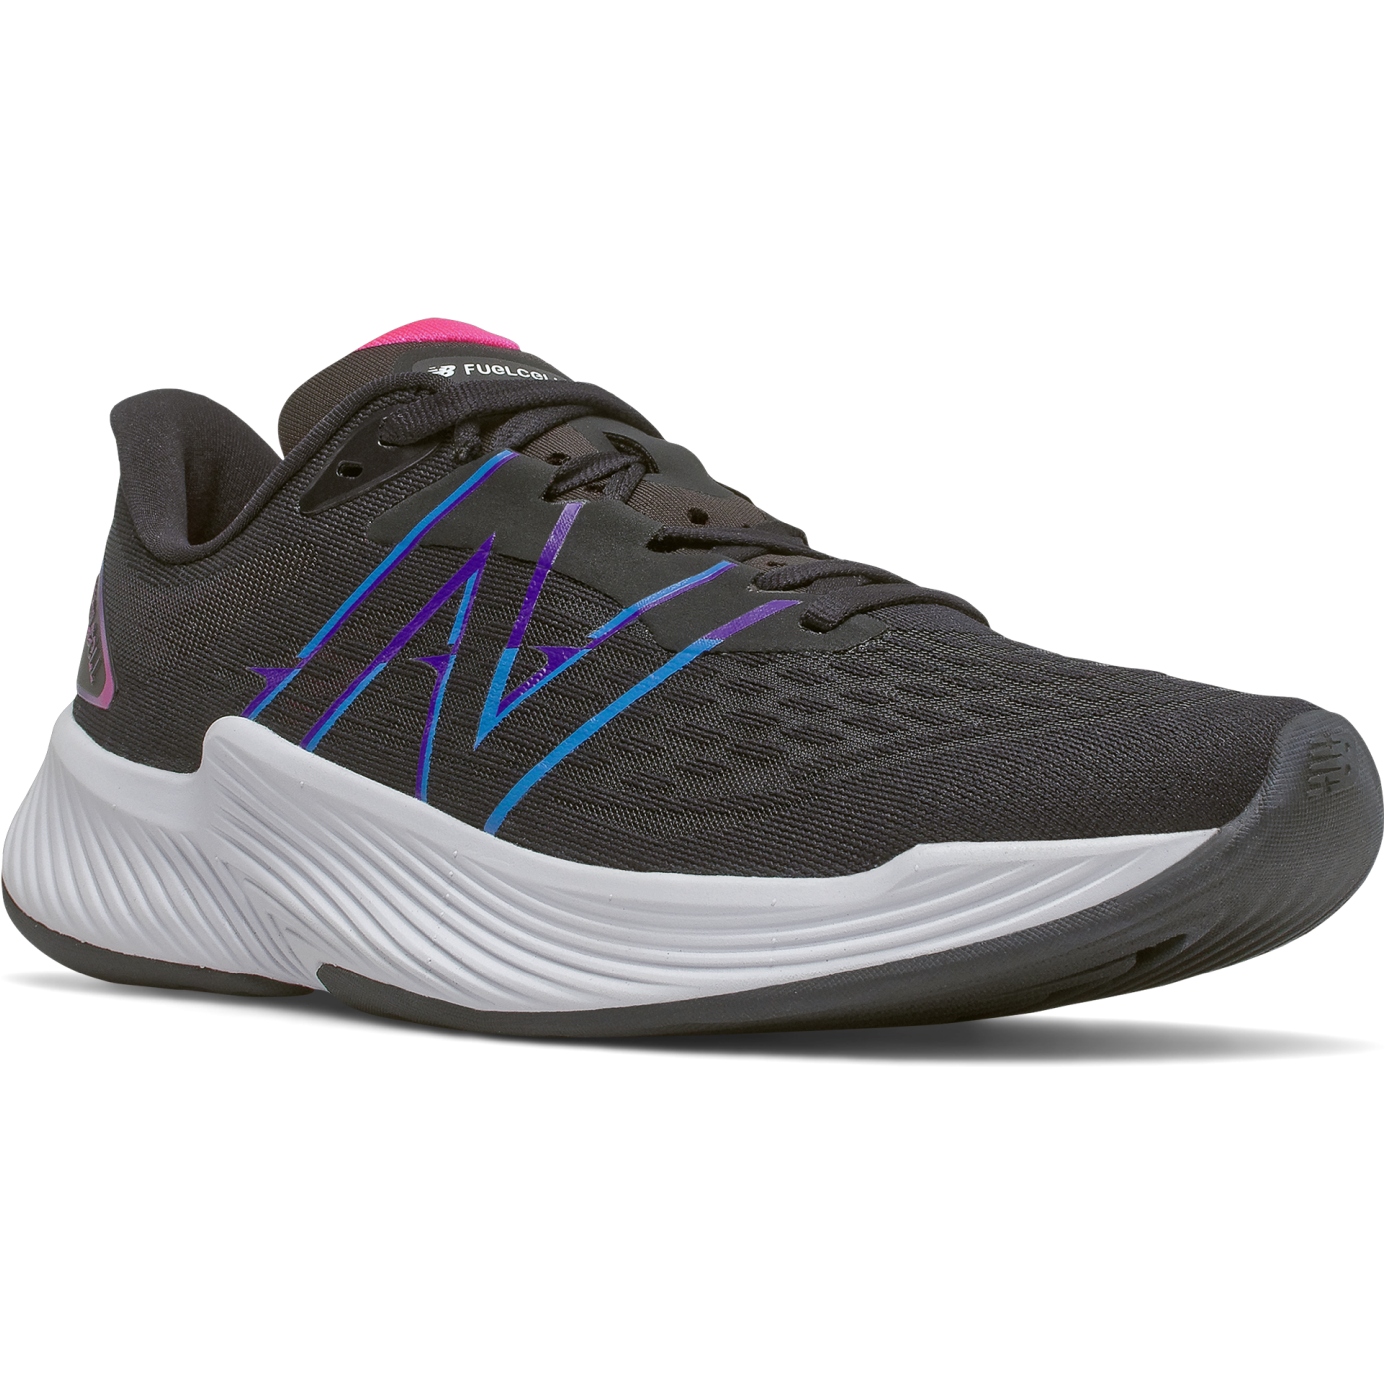 Immagine di New Balance FuelCell Prism v2 Womens Running Shoes - Black